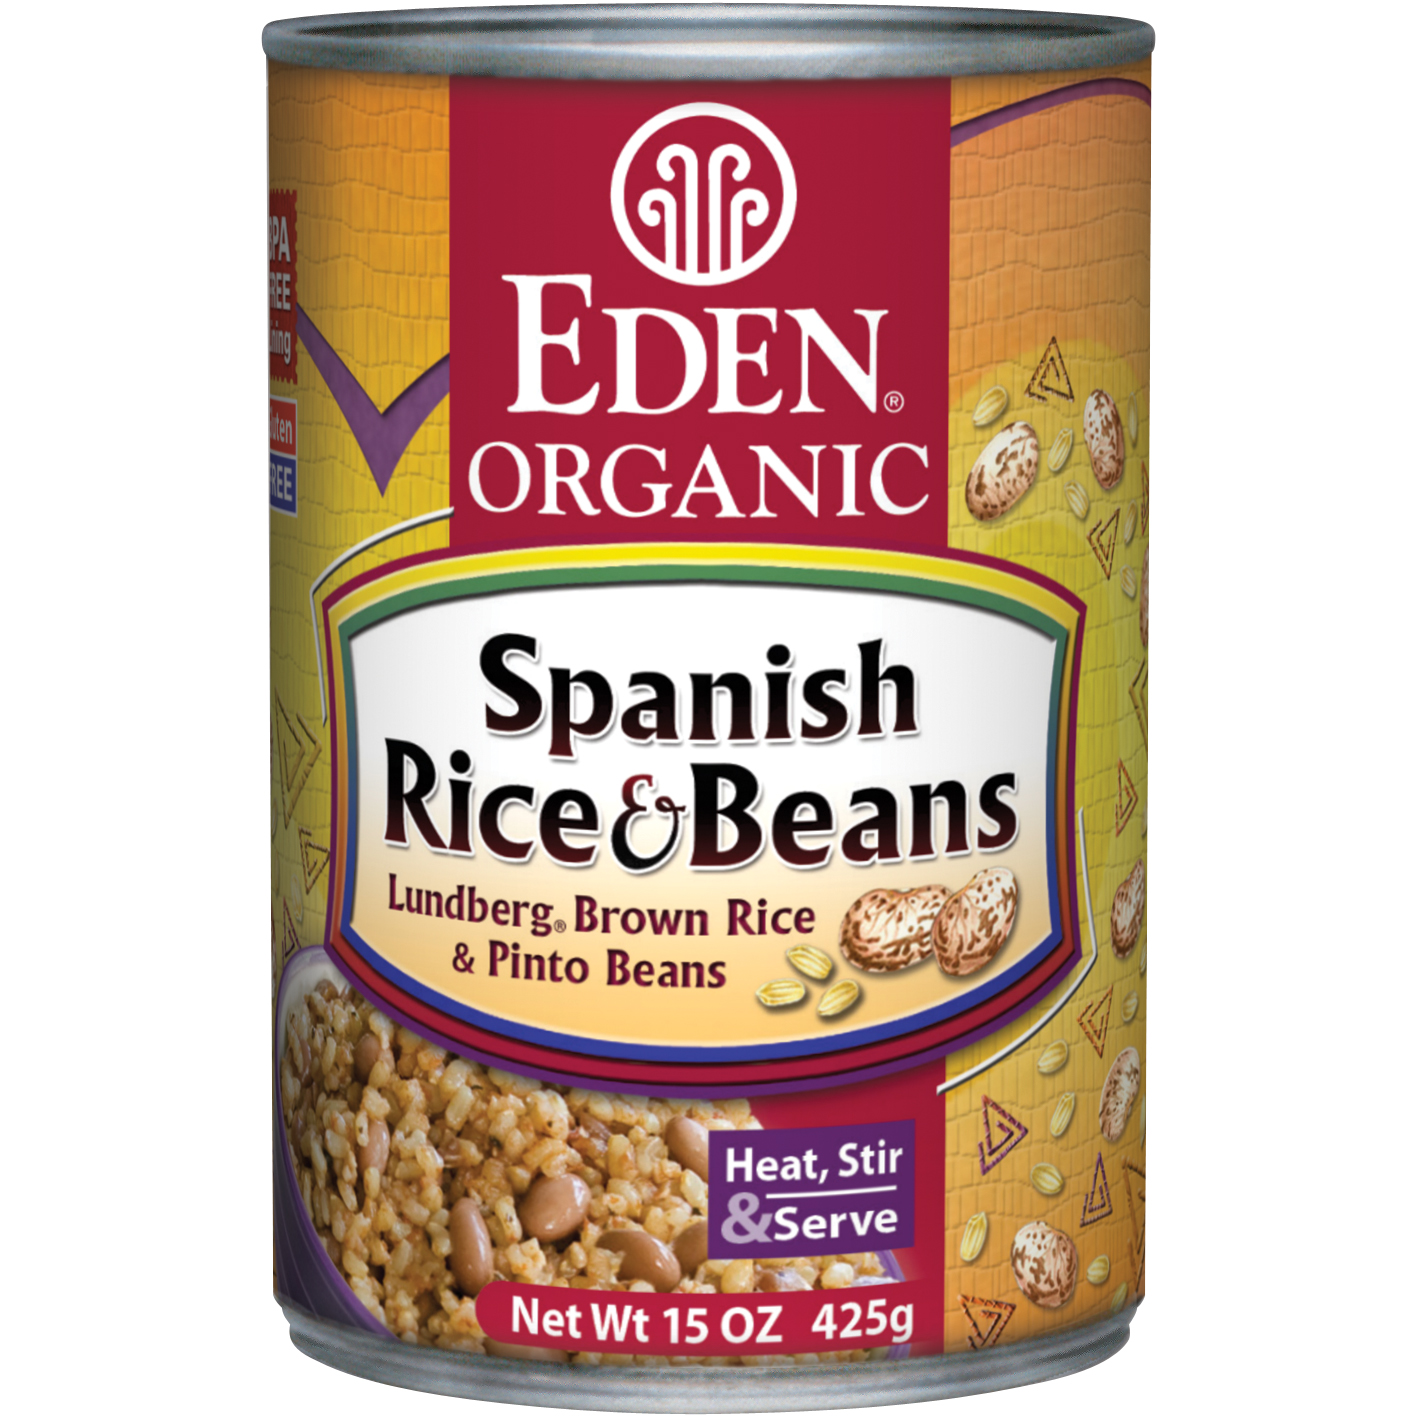 Spanish Rice And Beans, Eden Foods